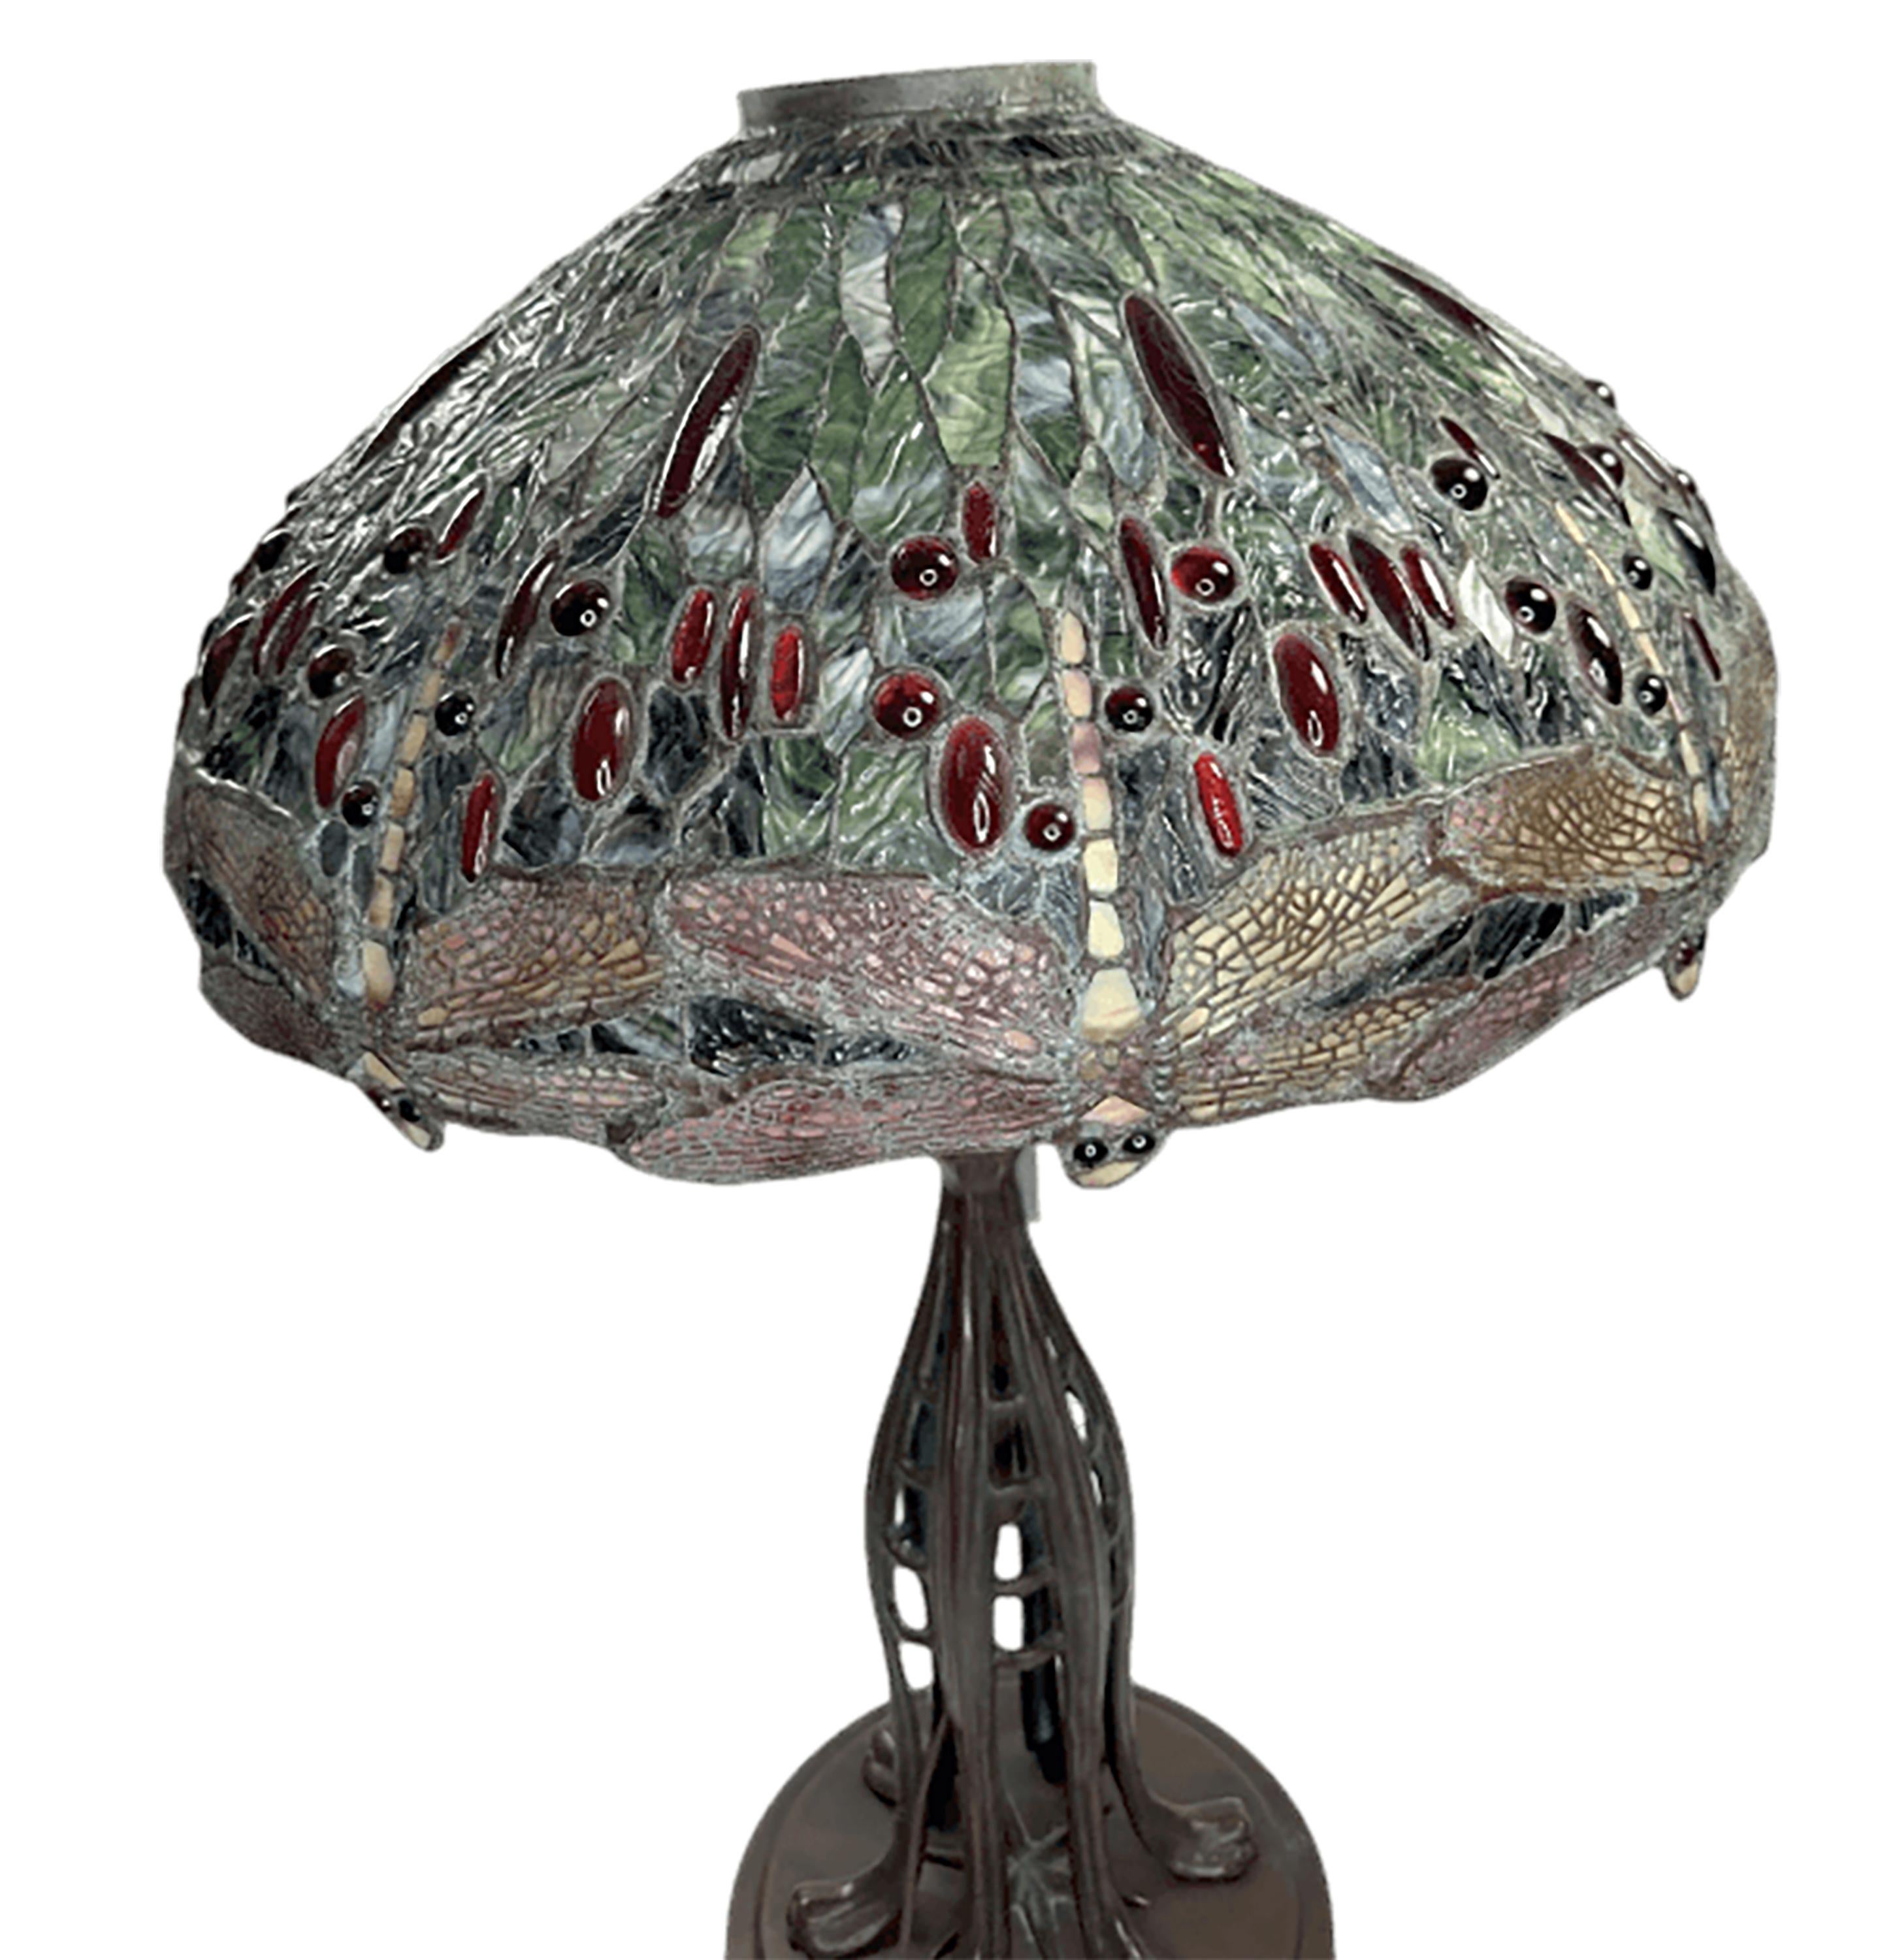 A pair of extraordinary art nouveau Tiffany style lamps with hand-made leaded glass shades. Each lamp shade has a unique finely detailed leaded glass design. The body is made of bronze with a rich chocolate brown patina. It is supported by six